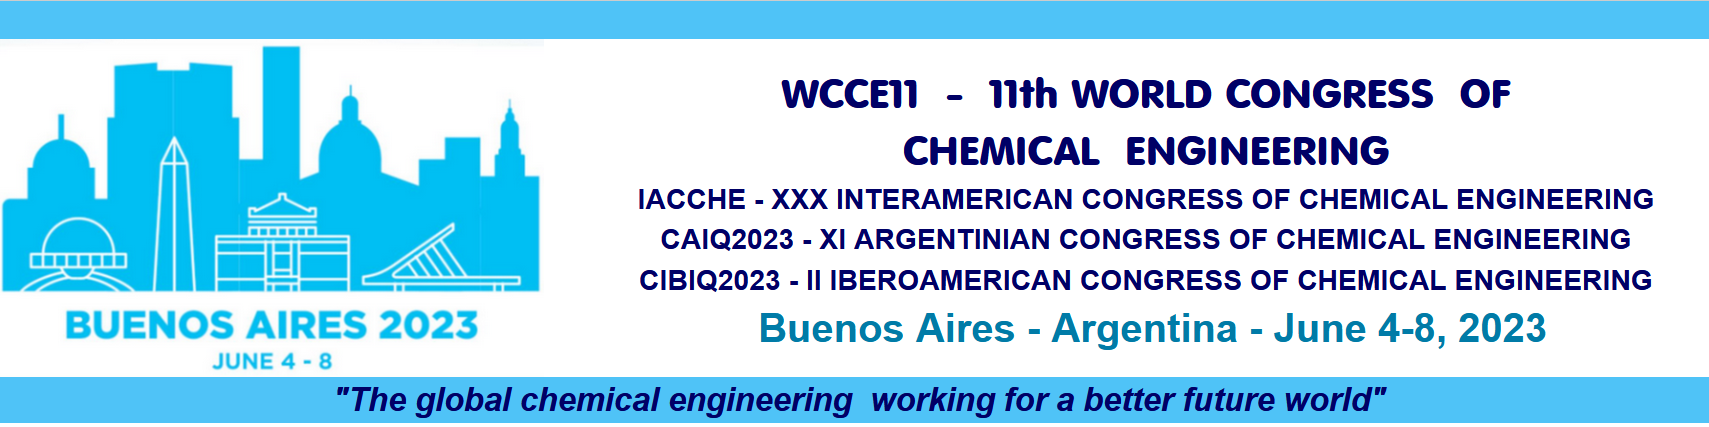 WCCE11 11th WORD CONGRESS OF CHEMICAL ENGINEERING /  IACChE2023-XXX INTERAMERICAN CONGRESS OF CHEMICAL ENGINEERING // Incorporating: CAIQ2023-XI ARGENTINIAN CONGRESS OF CHEMICAL ENGINEERING - CIBIQ2023-II IBEROAMERICAN CONGRESS OF CHEMICAL ENGINEERING //- Buenos Aires - Argentina - June 4-8, 2023 -//